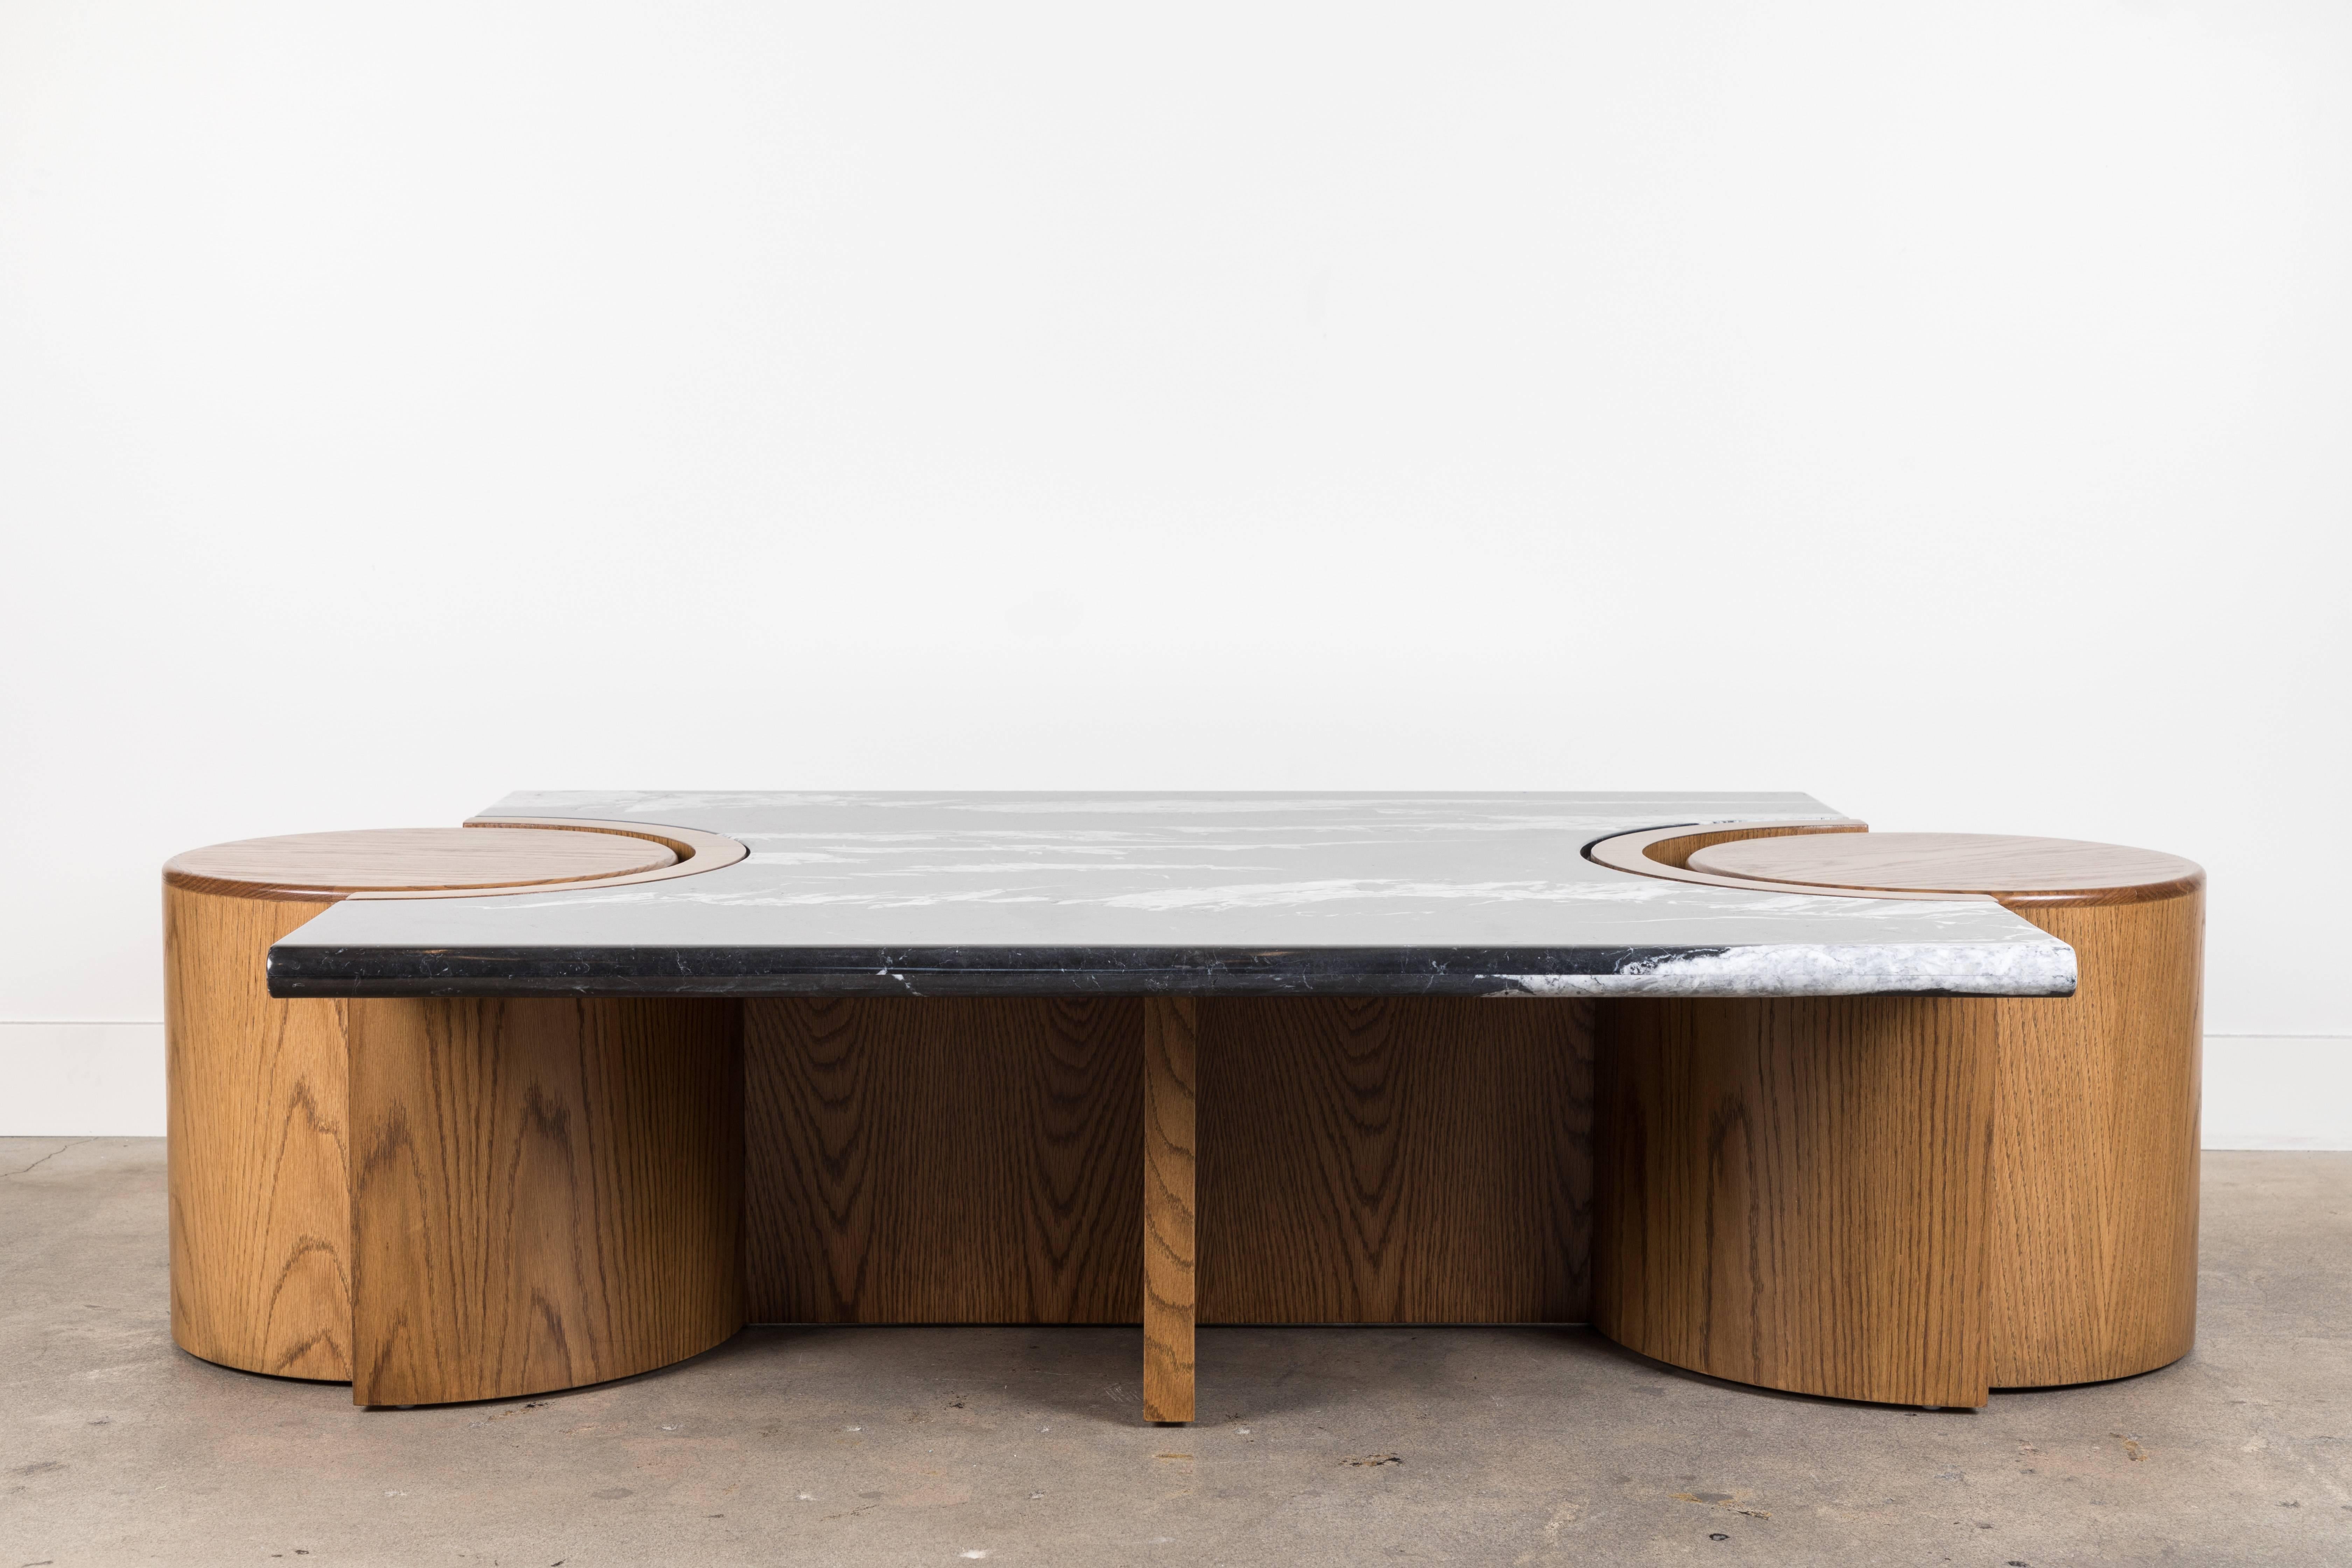 The Prospect Coffee Table features a stone top that rests atop a sculpted American walnut or white oak base with two cutouts for drum tables on either end. Shown here in Negra Marquina Marble and Oiled Oak.

Dimensions: 64